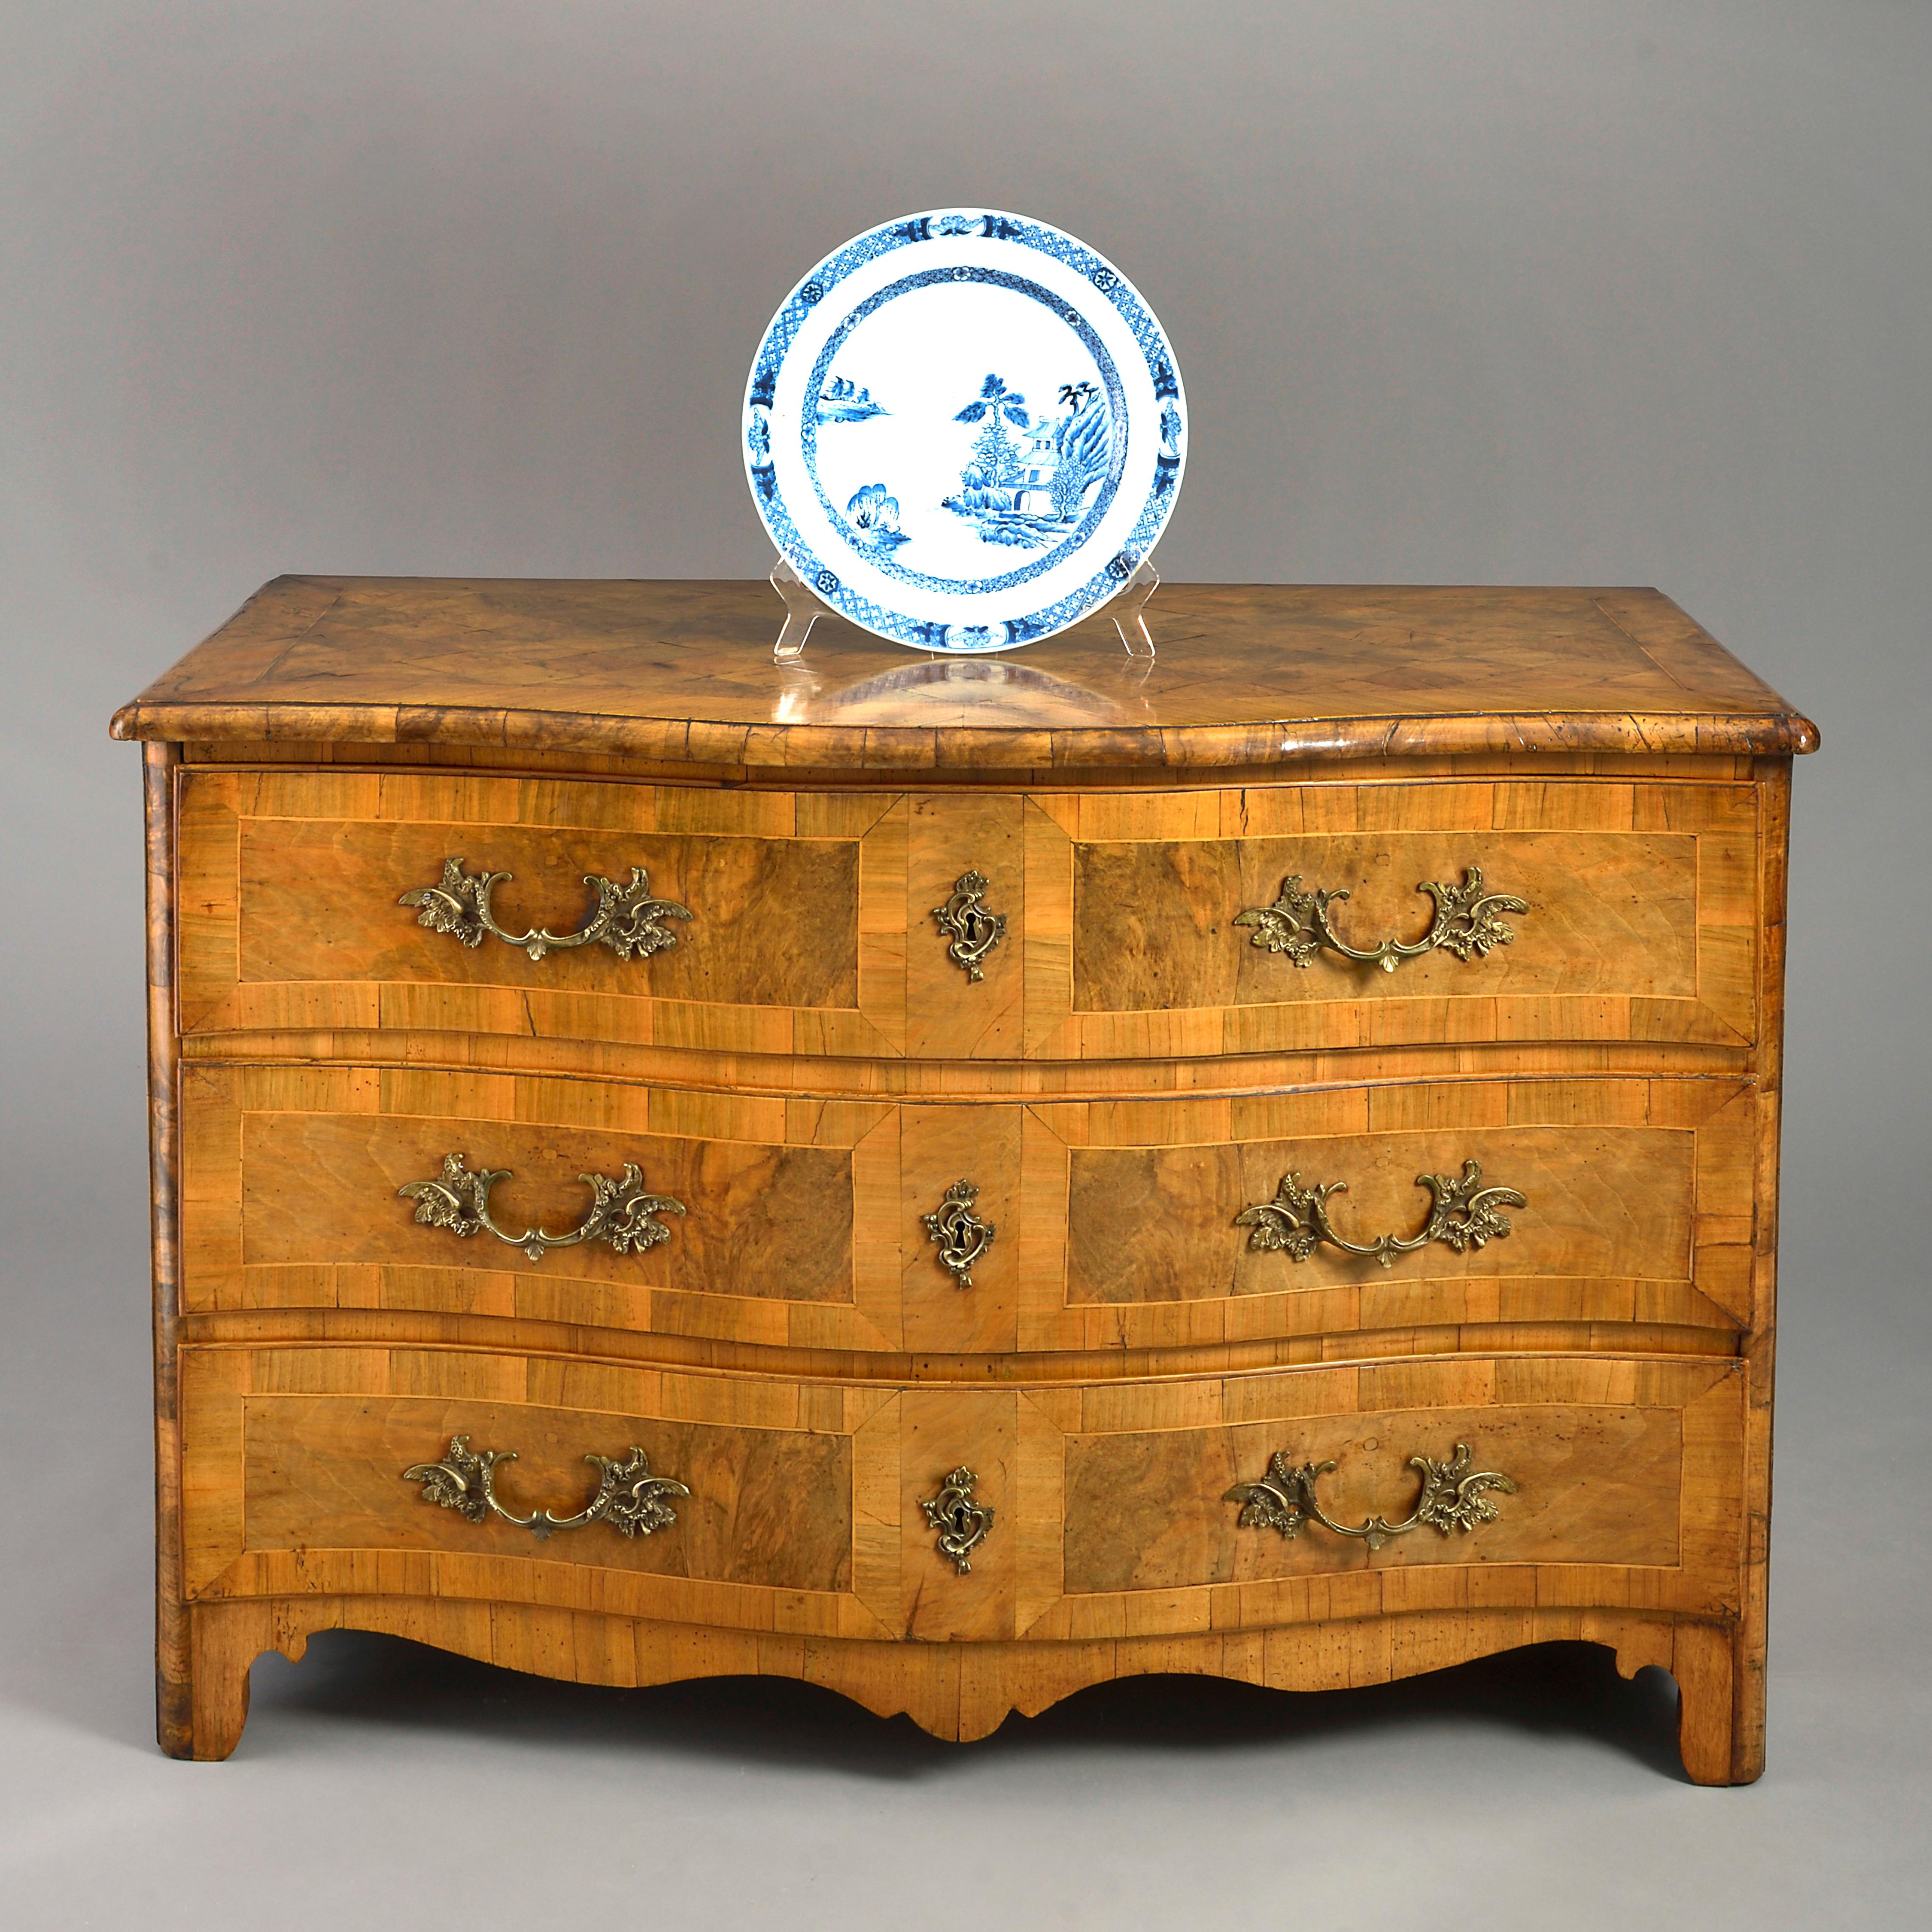 An 18th century Louis XV period commode of serpentine form, the overhanging parquetry top with crossbanding above three long paneled drawers with brass Rococo handles and lock escutcheons and terminating in a shaped apron raised upon bracket feet.